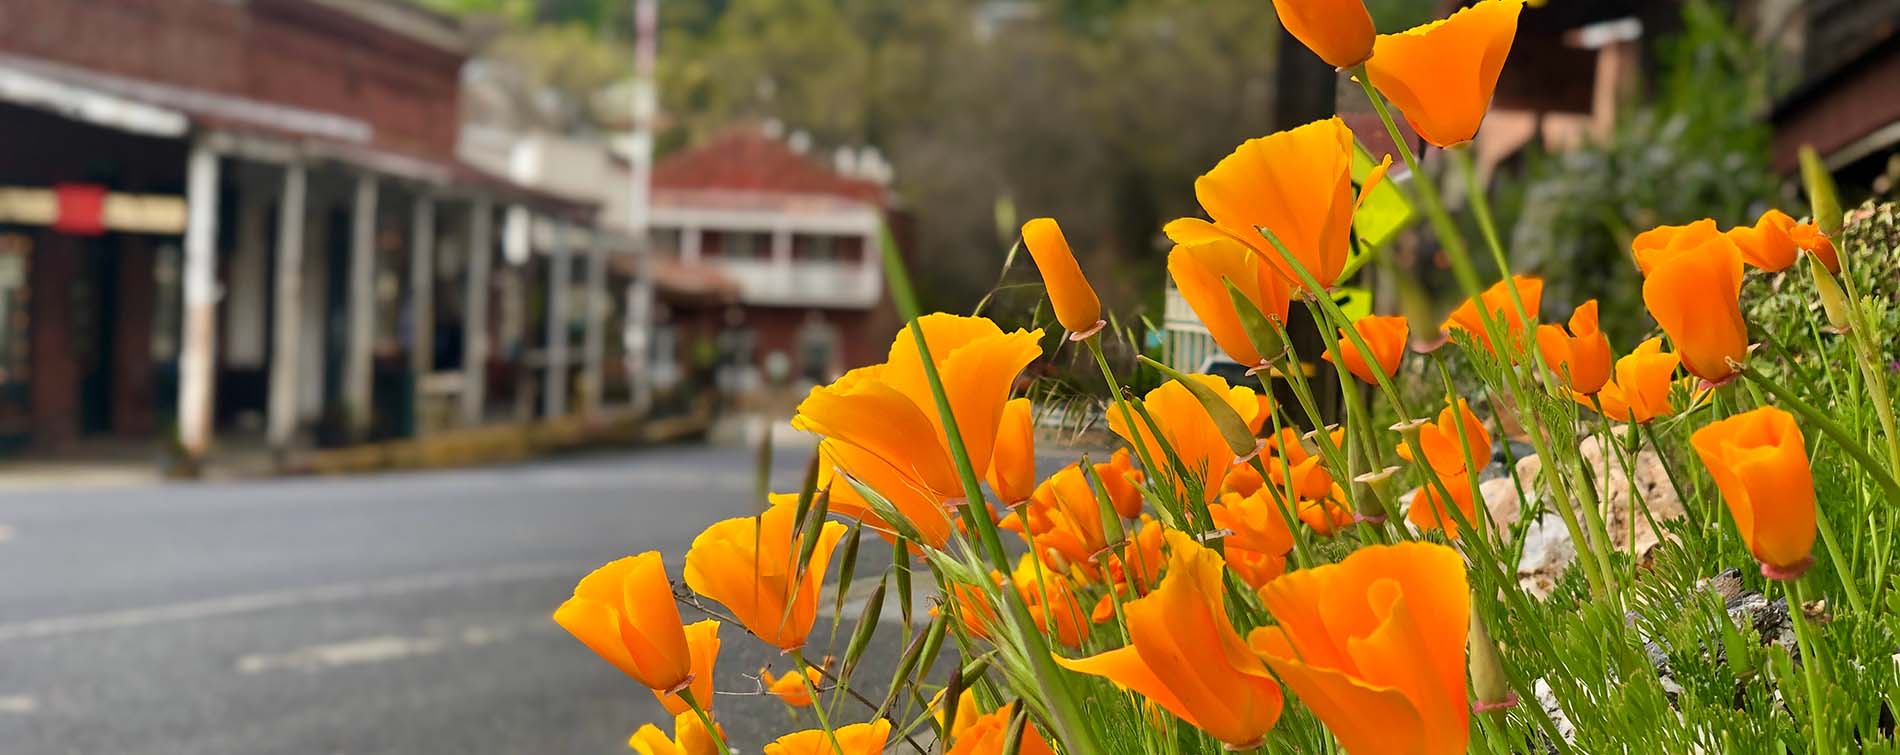 amador city with poppies in the foreground